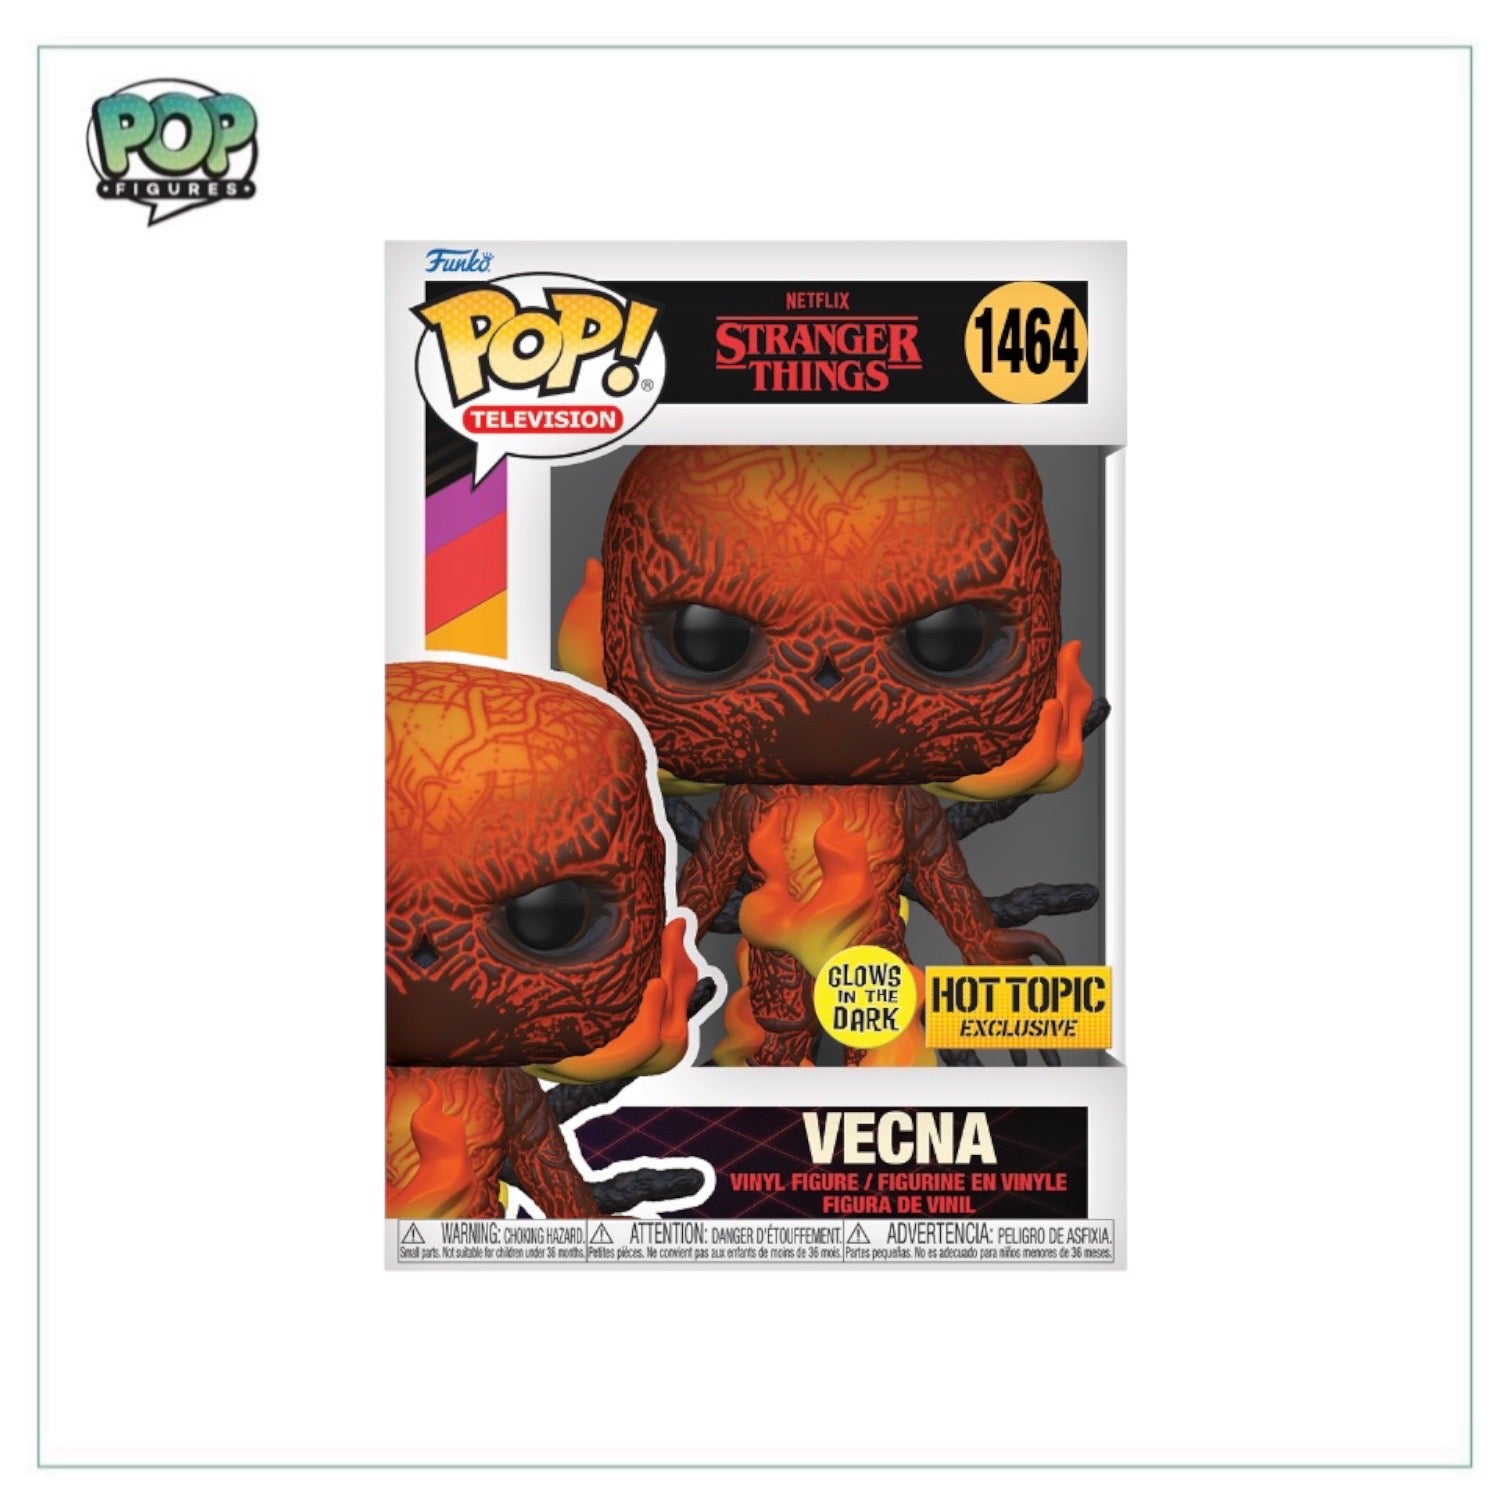 Vecna #1464 (Glows in the Dark) Funko Pop! - Stranger Things - Hot Topic Exclusive